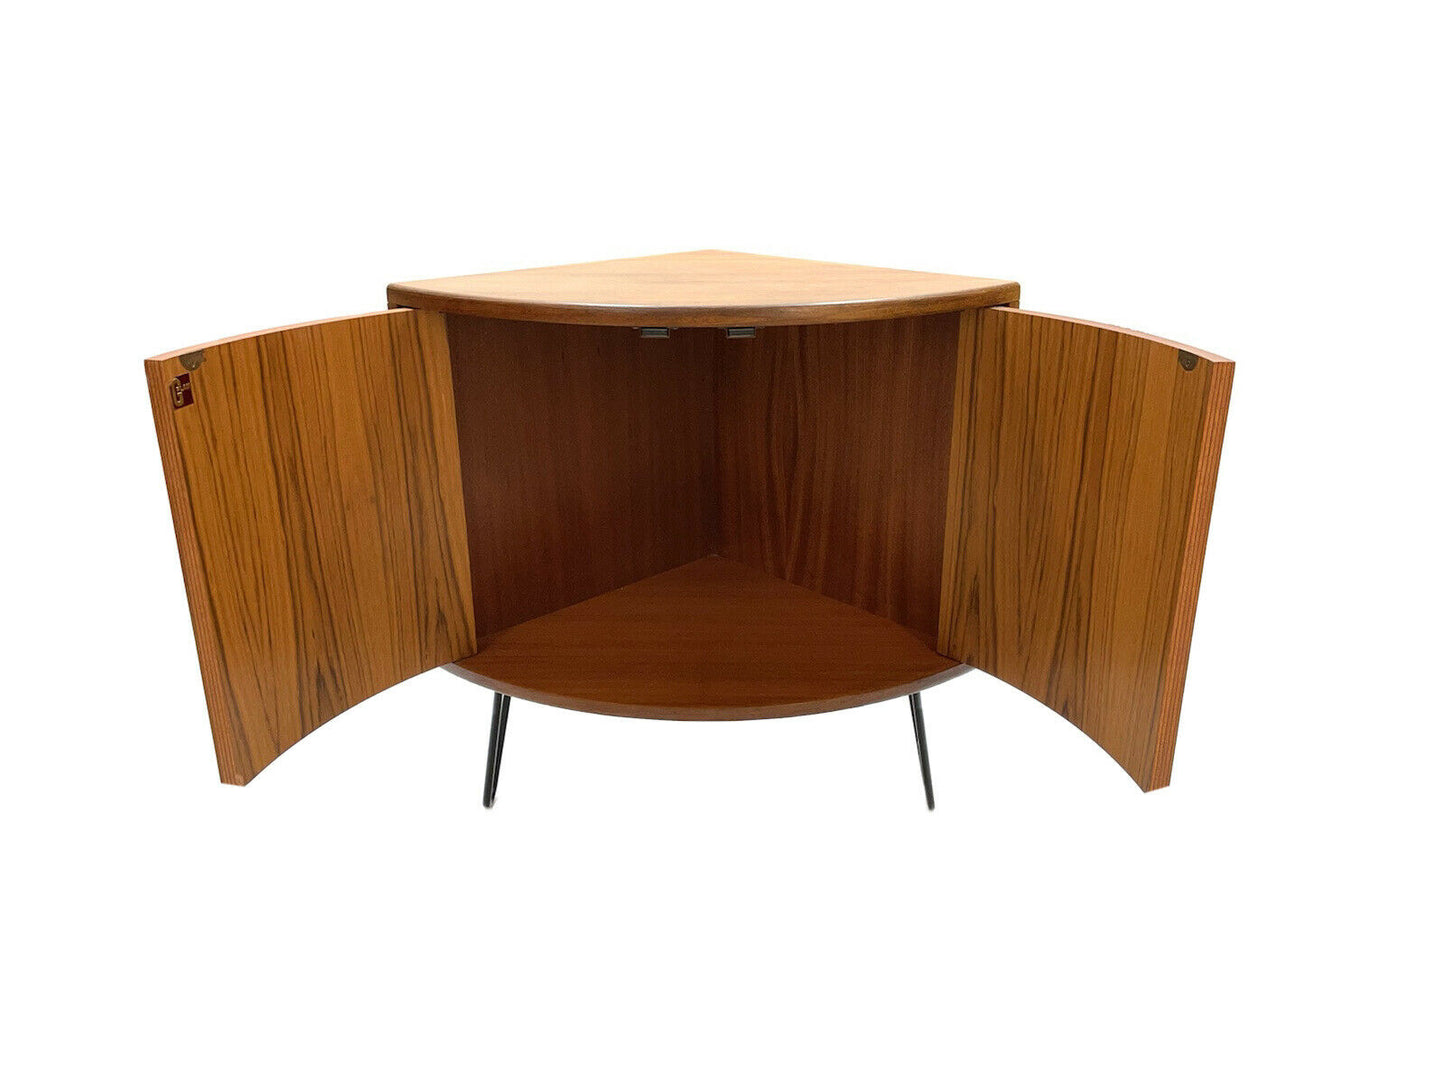 Similar Pair Of G Plan Fresco Corner Cabinets / Bedside Tables with Hairpin Legs